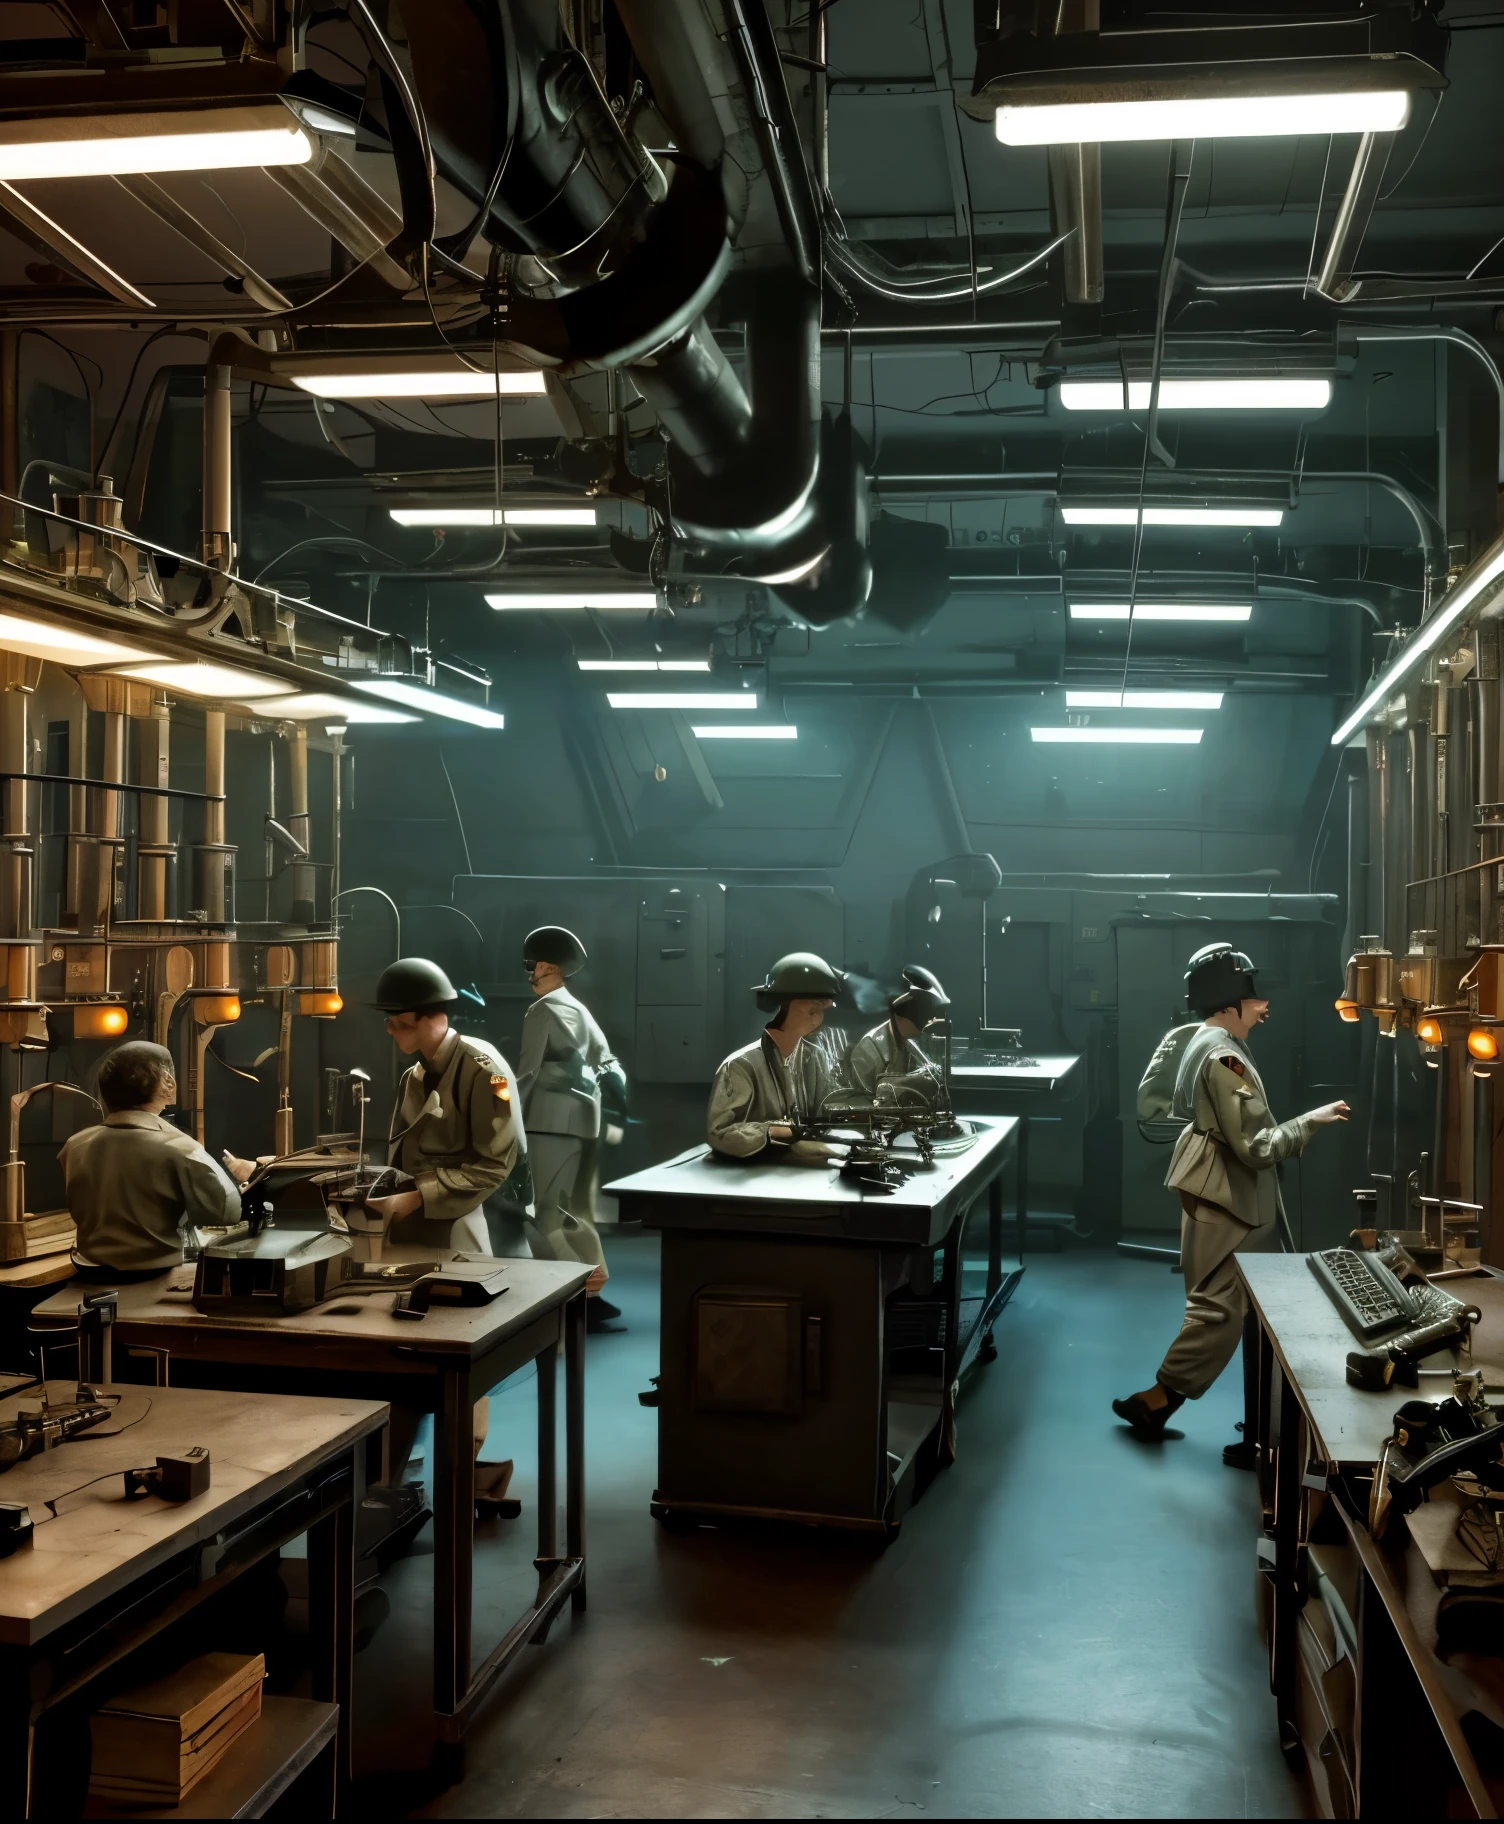  A World War Il retro sci-fi scene with brains lined up on a laboratory table, surrounded by vintage scientific equipment and flickering lights